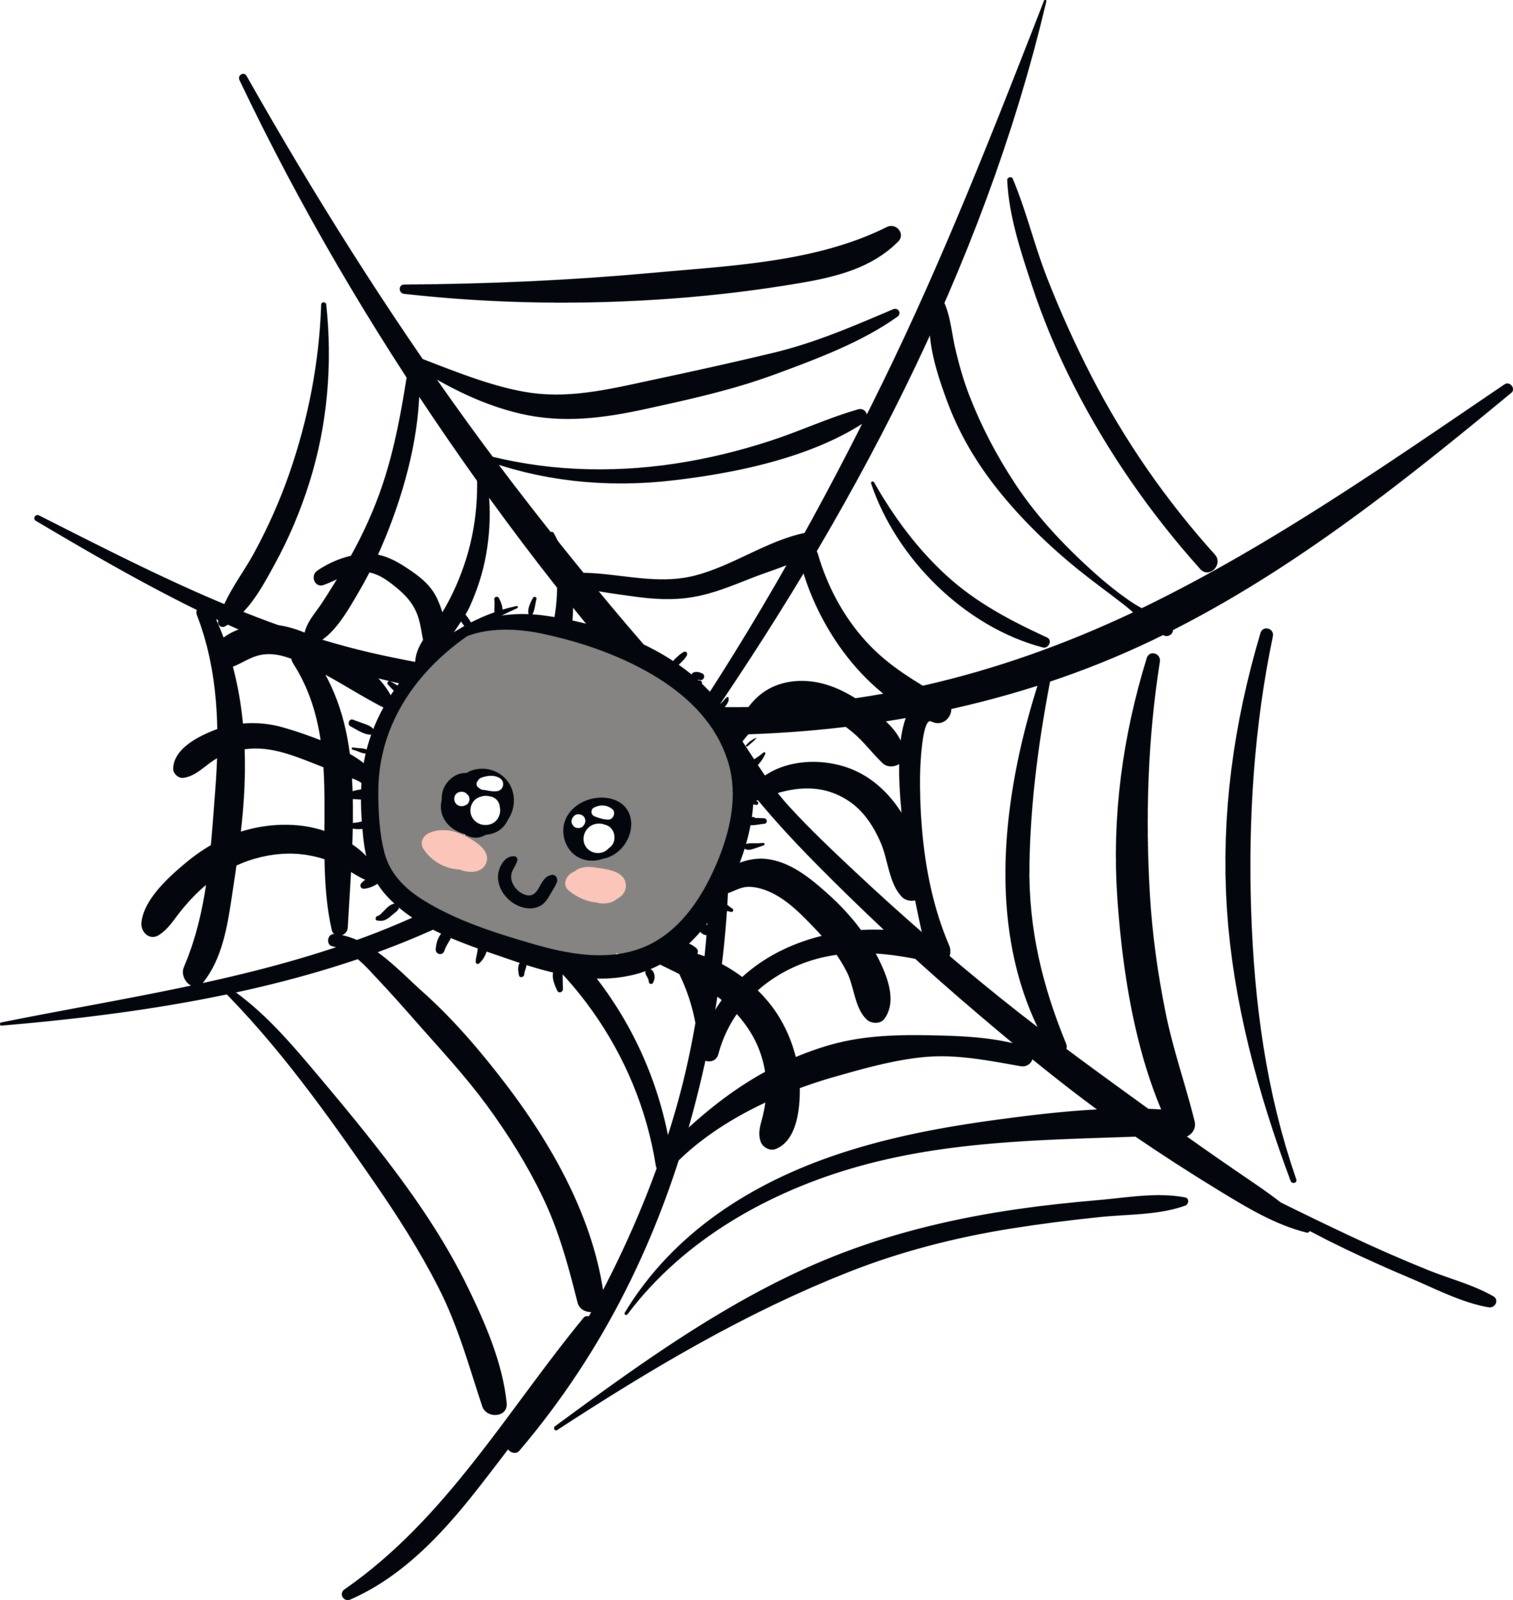 Cartoon of a cute grey spider on a web vector illustration on wh by Morphart